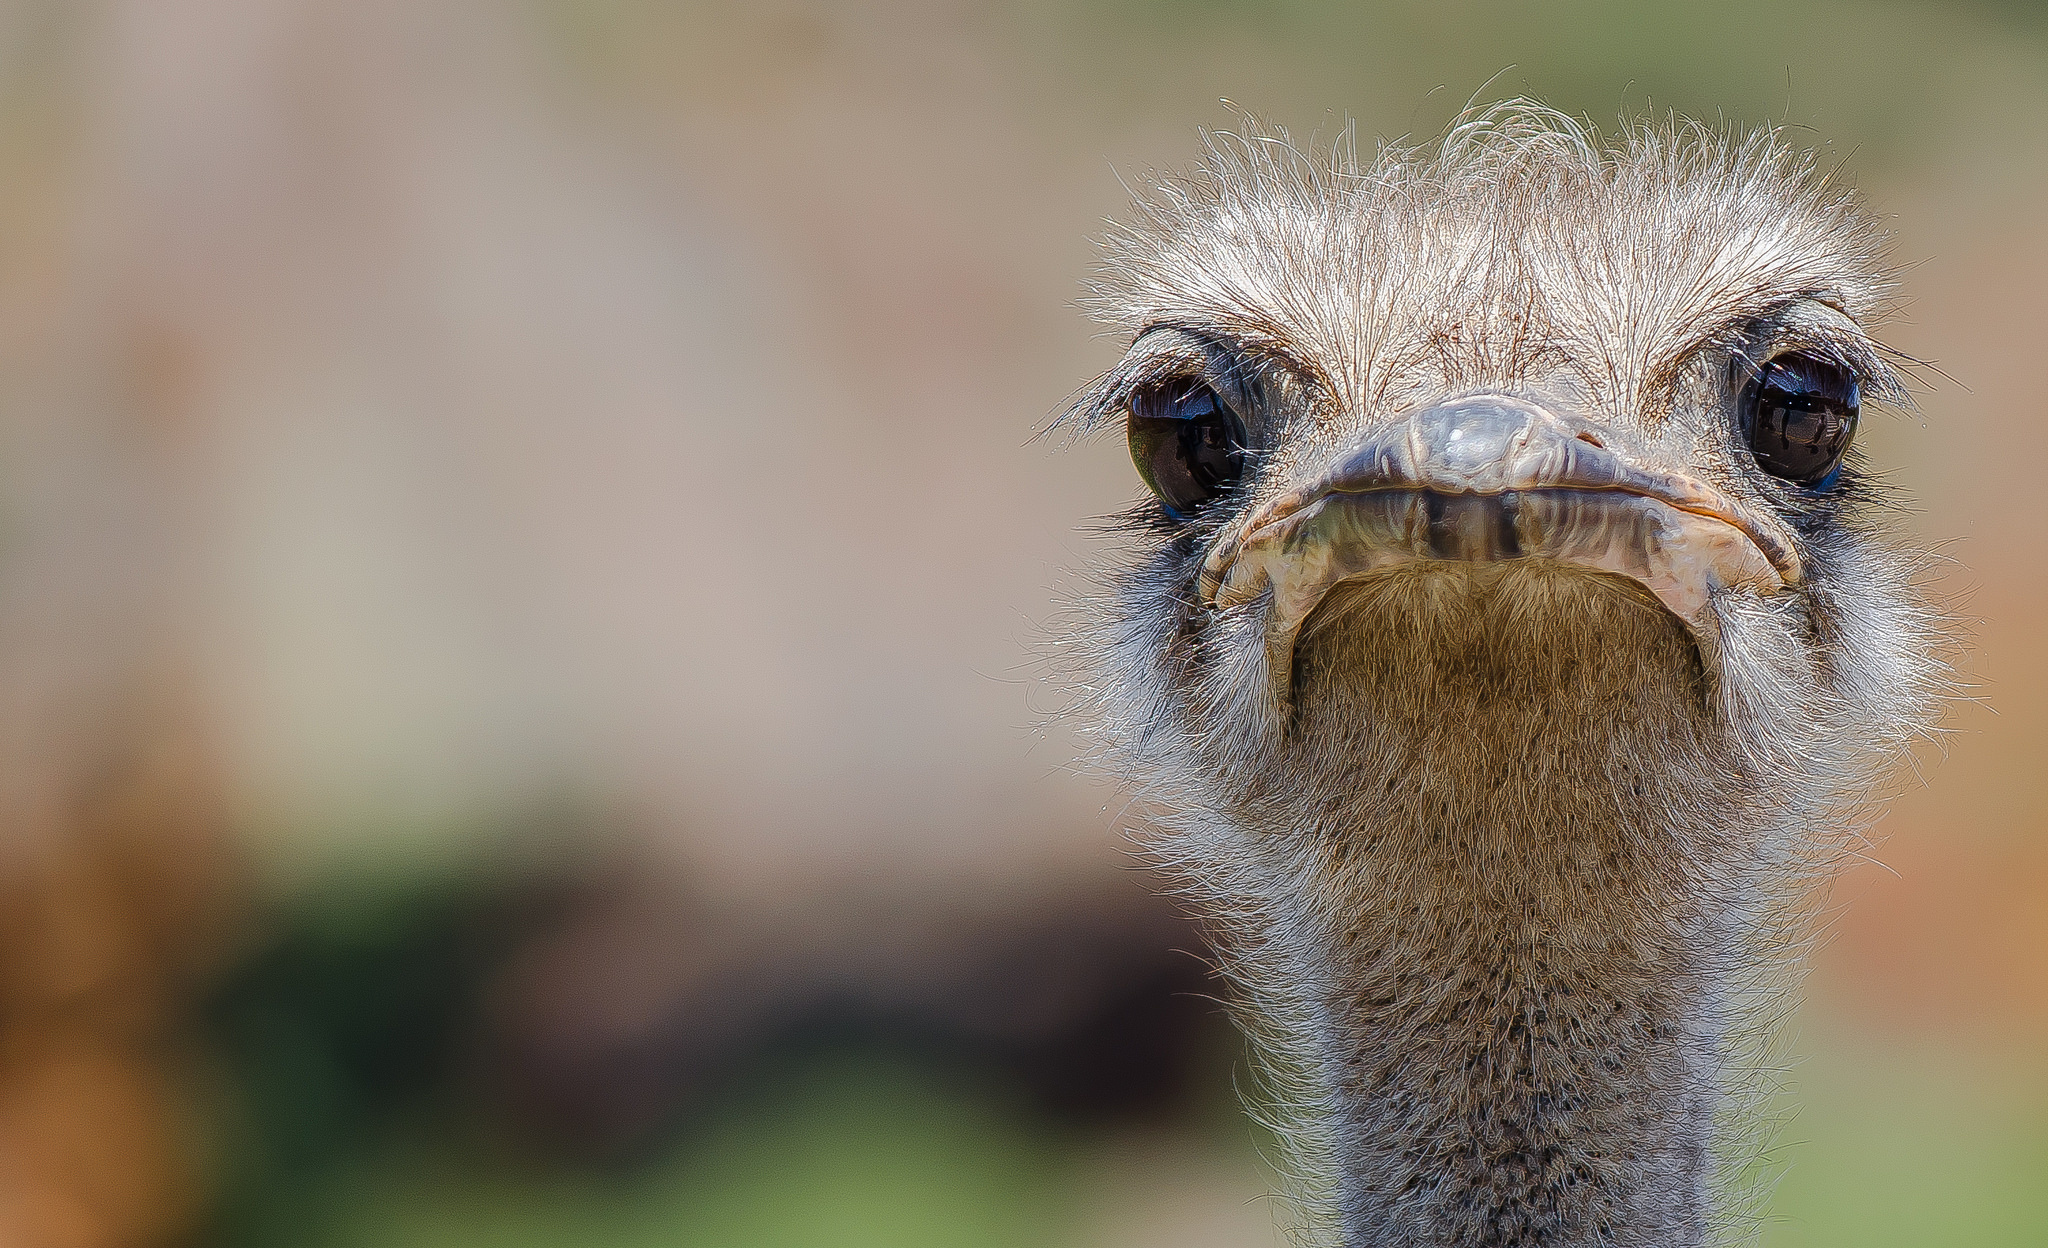 Diverse ostrich wallpapers, Collection of images, Visual variety, Wallpaper selection, 2050x1250 HD Desktop